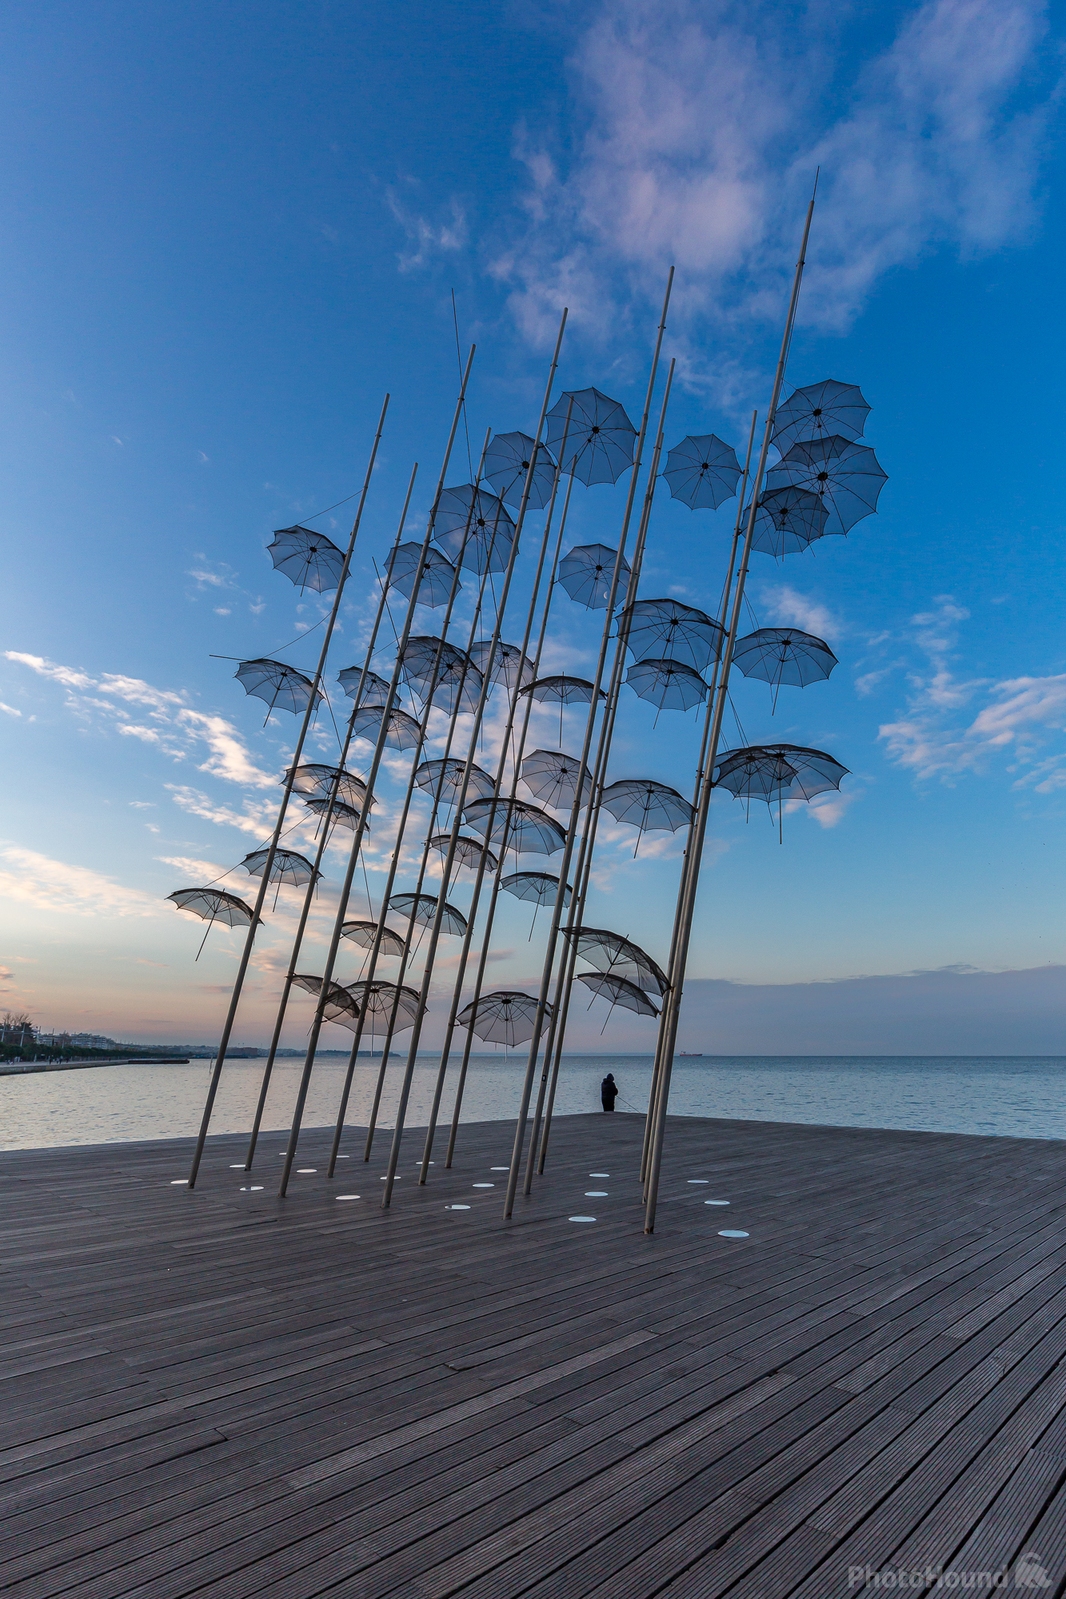 Image of Thessaloniki Seafront by Dancho Hristov